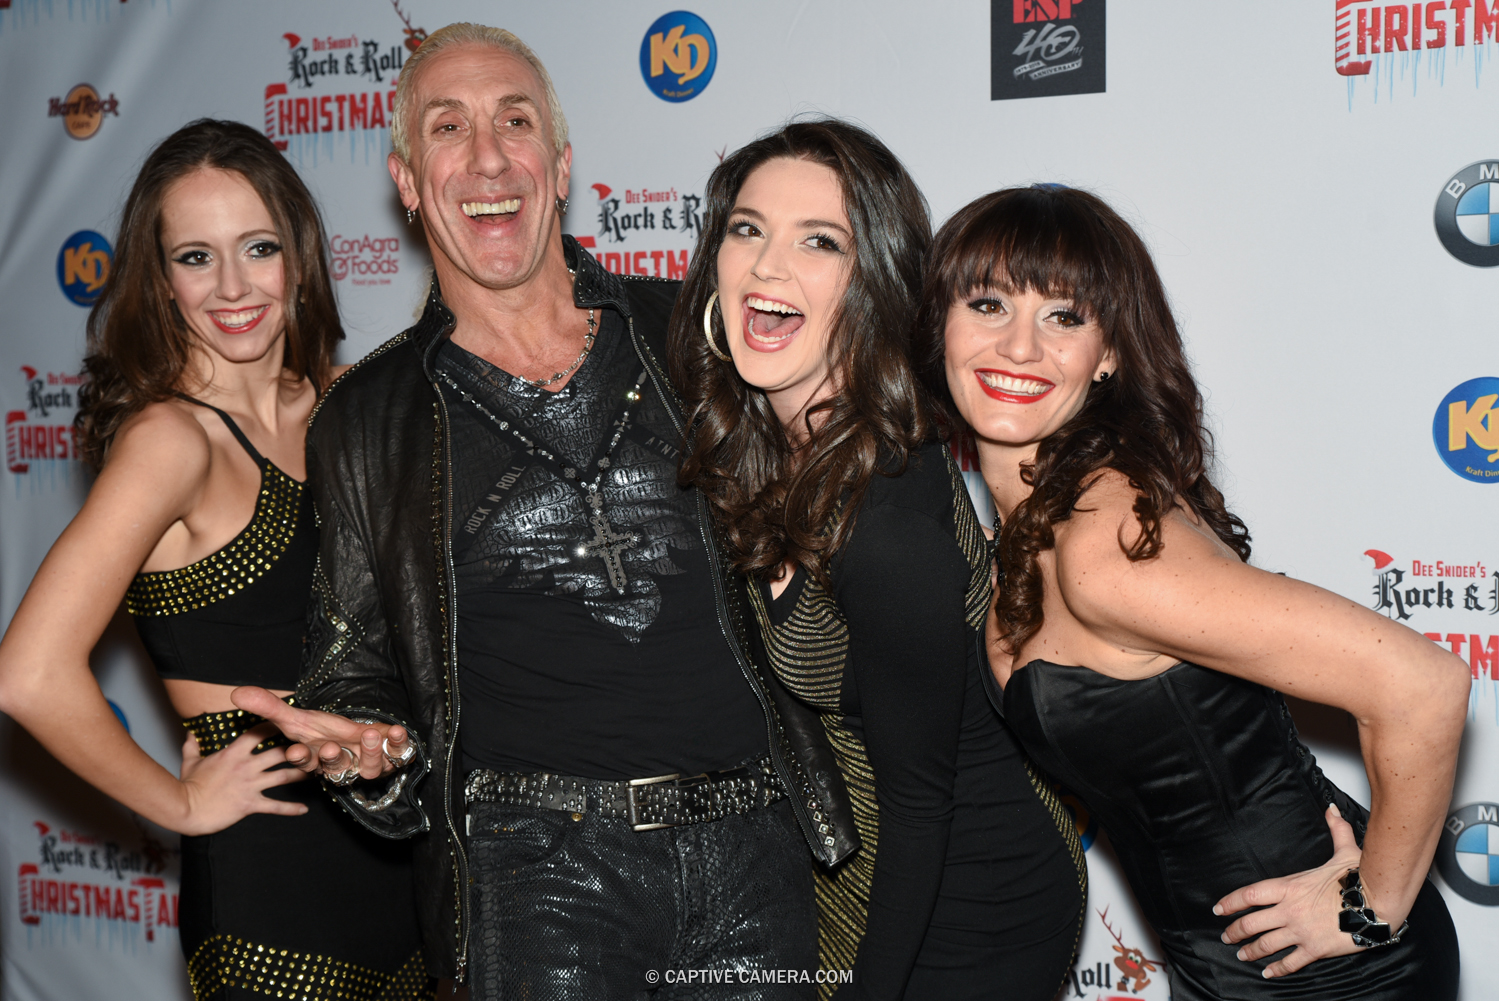 RED CARPET AT DEE SNIDER'S ROCK AND ROLL CHRISTMAS TALE